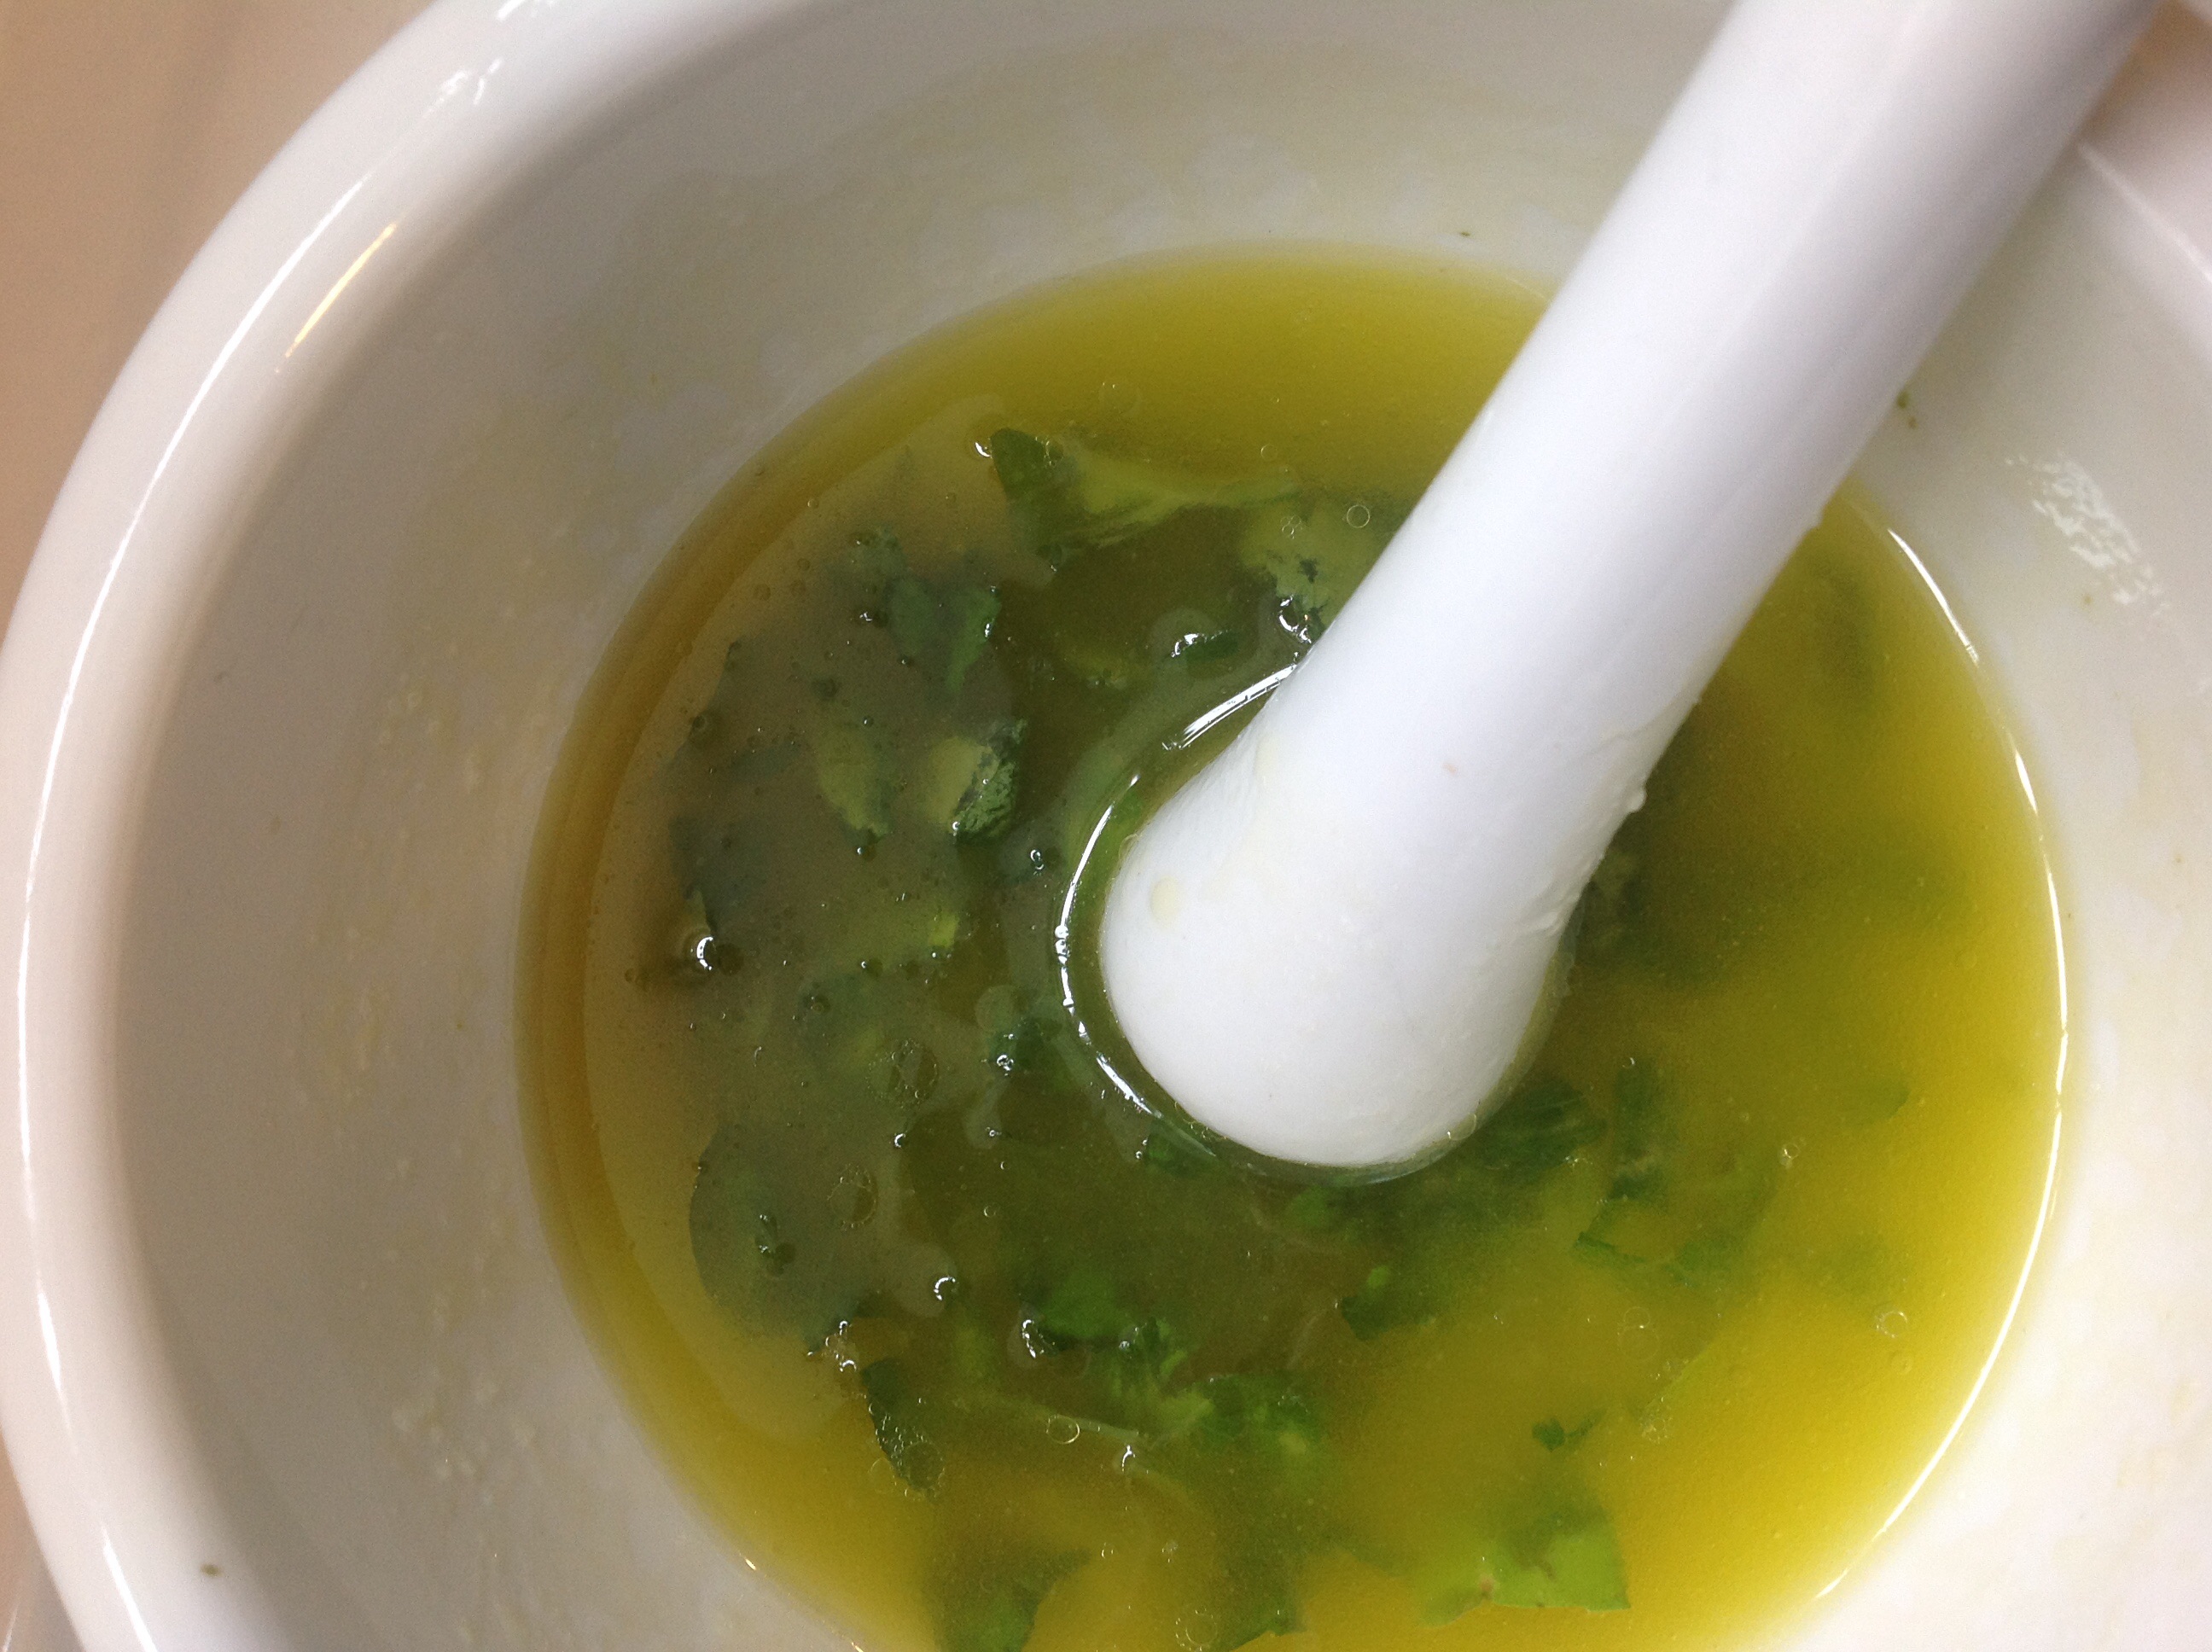 Chopped basil infused in olive oil and lemon